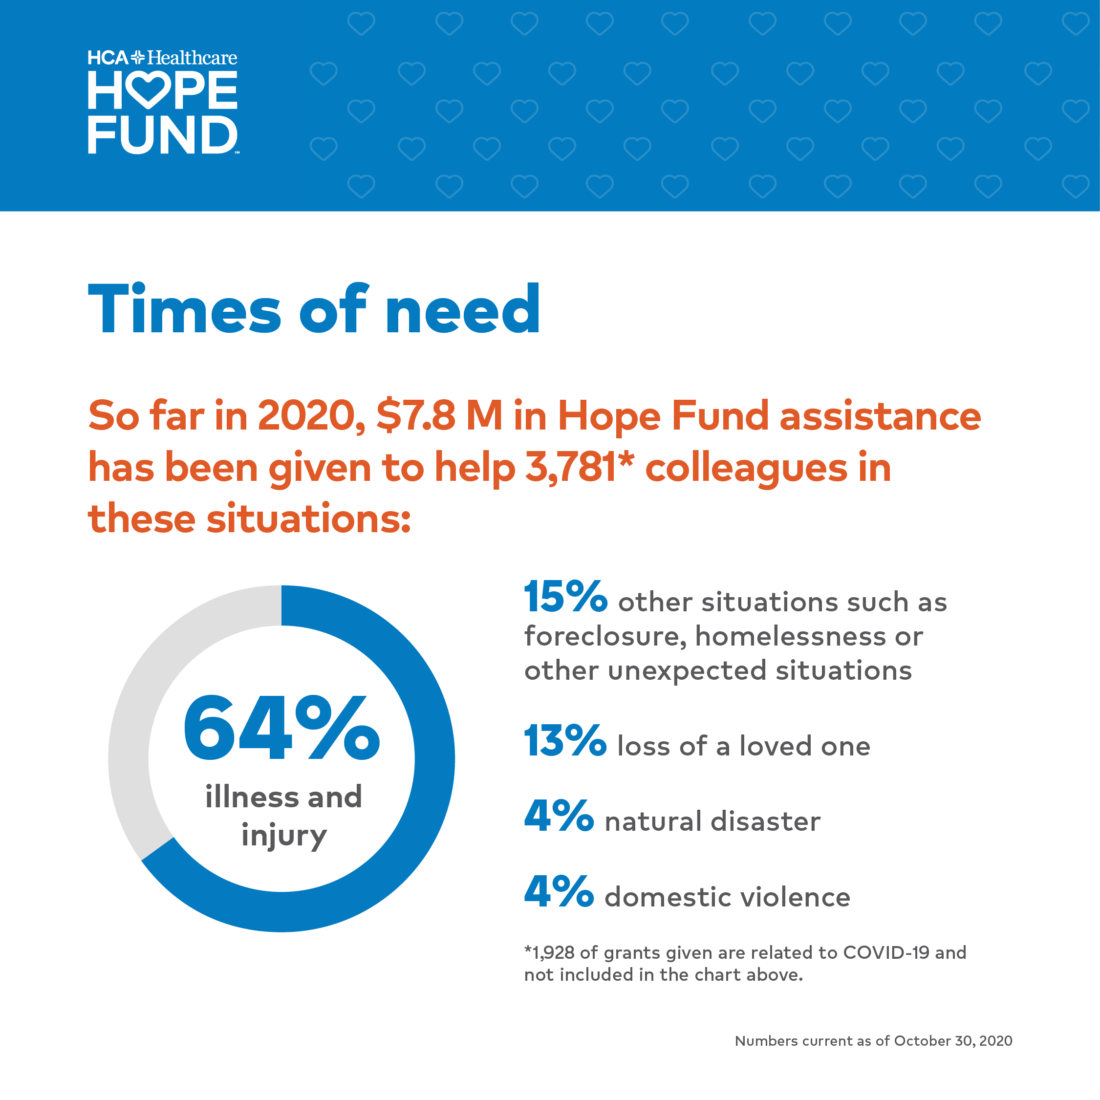 Graph showing how Hope Fund assistance has been given so far in 2020. 